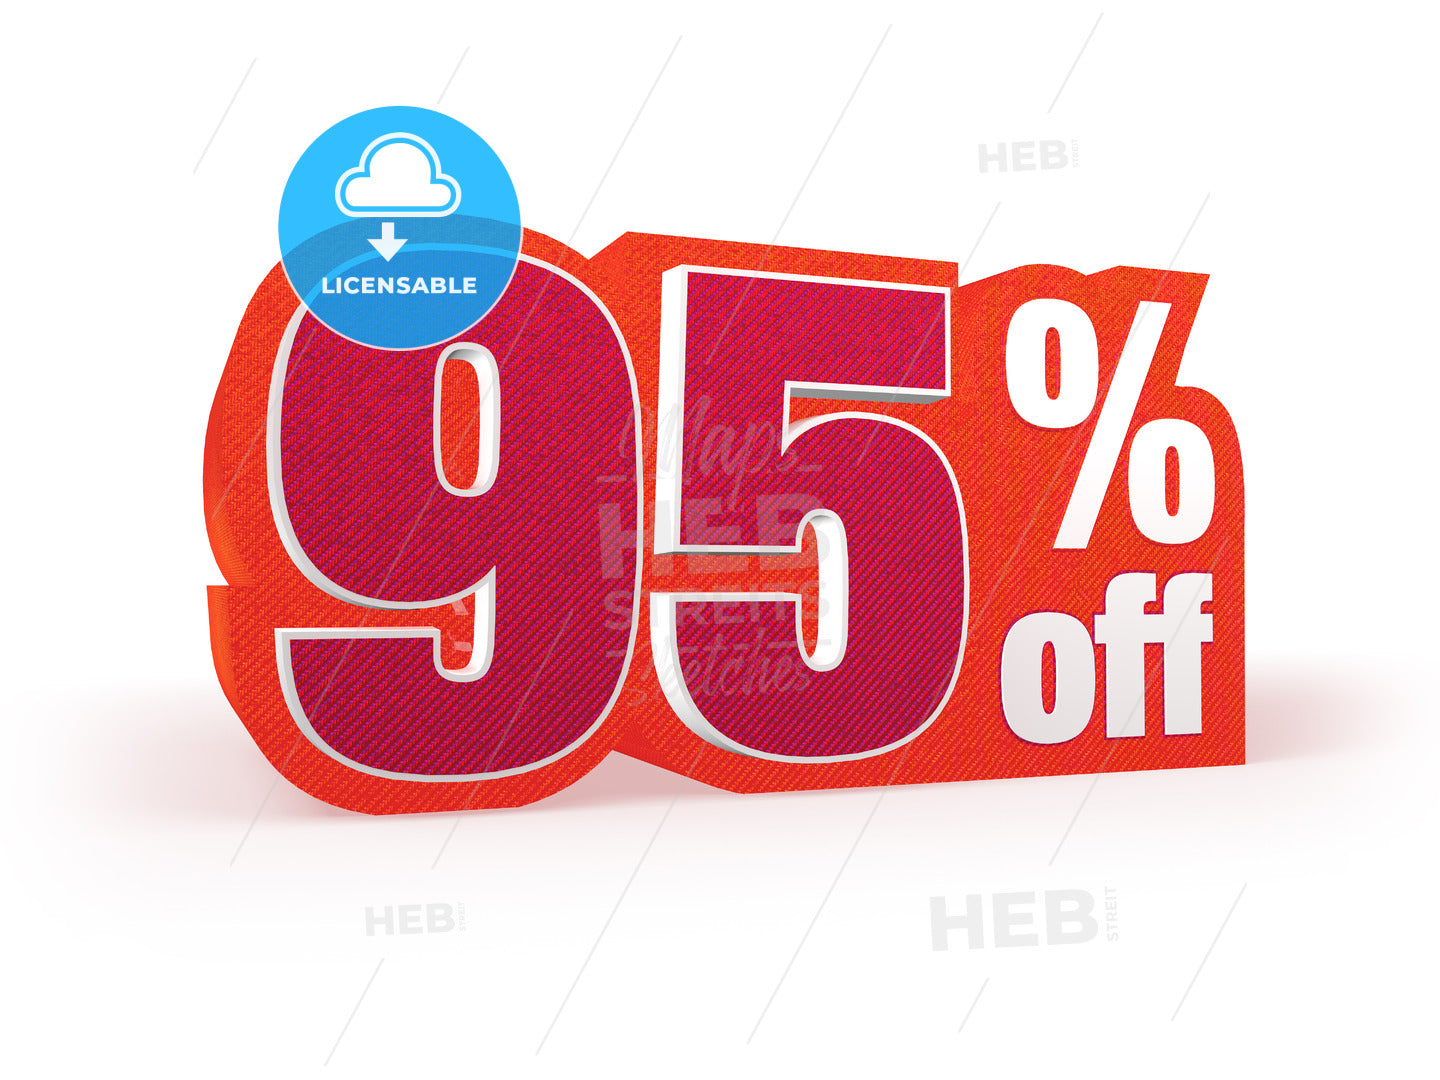 95 percent off red wool styled discount price sign – instant download